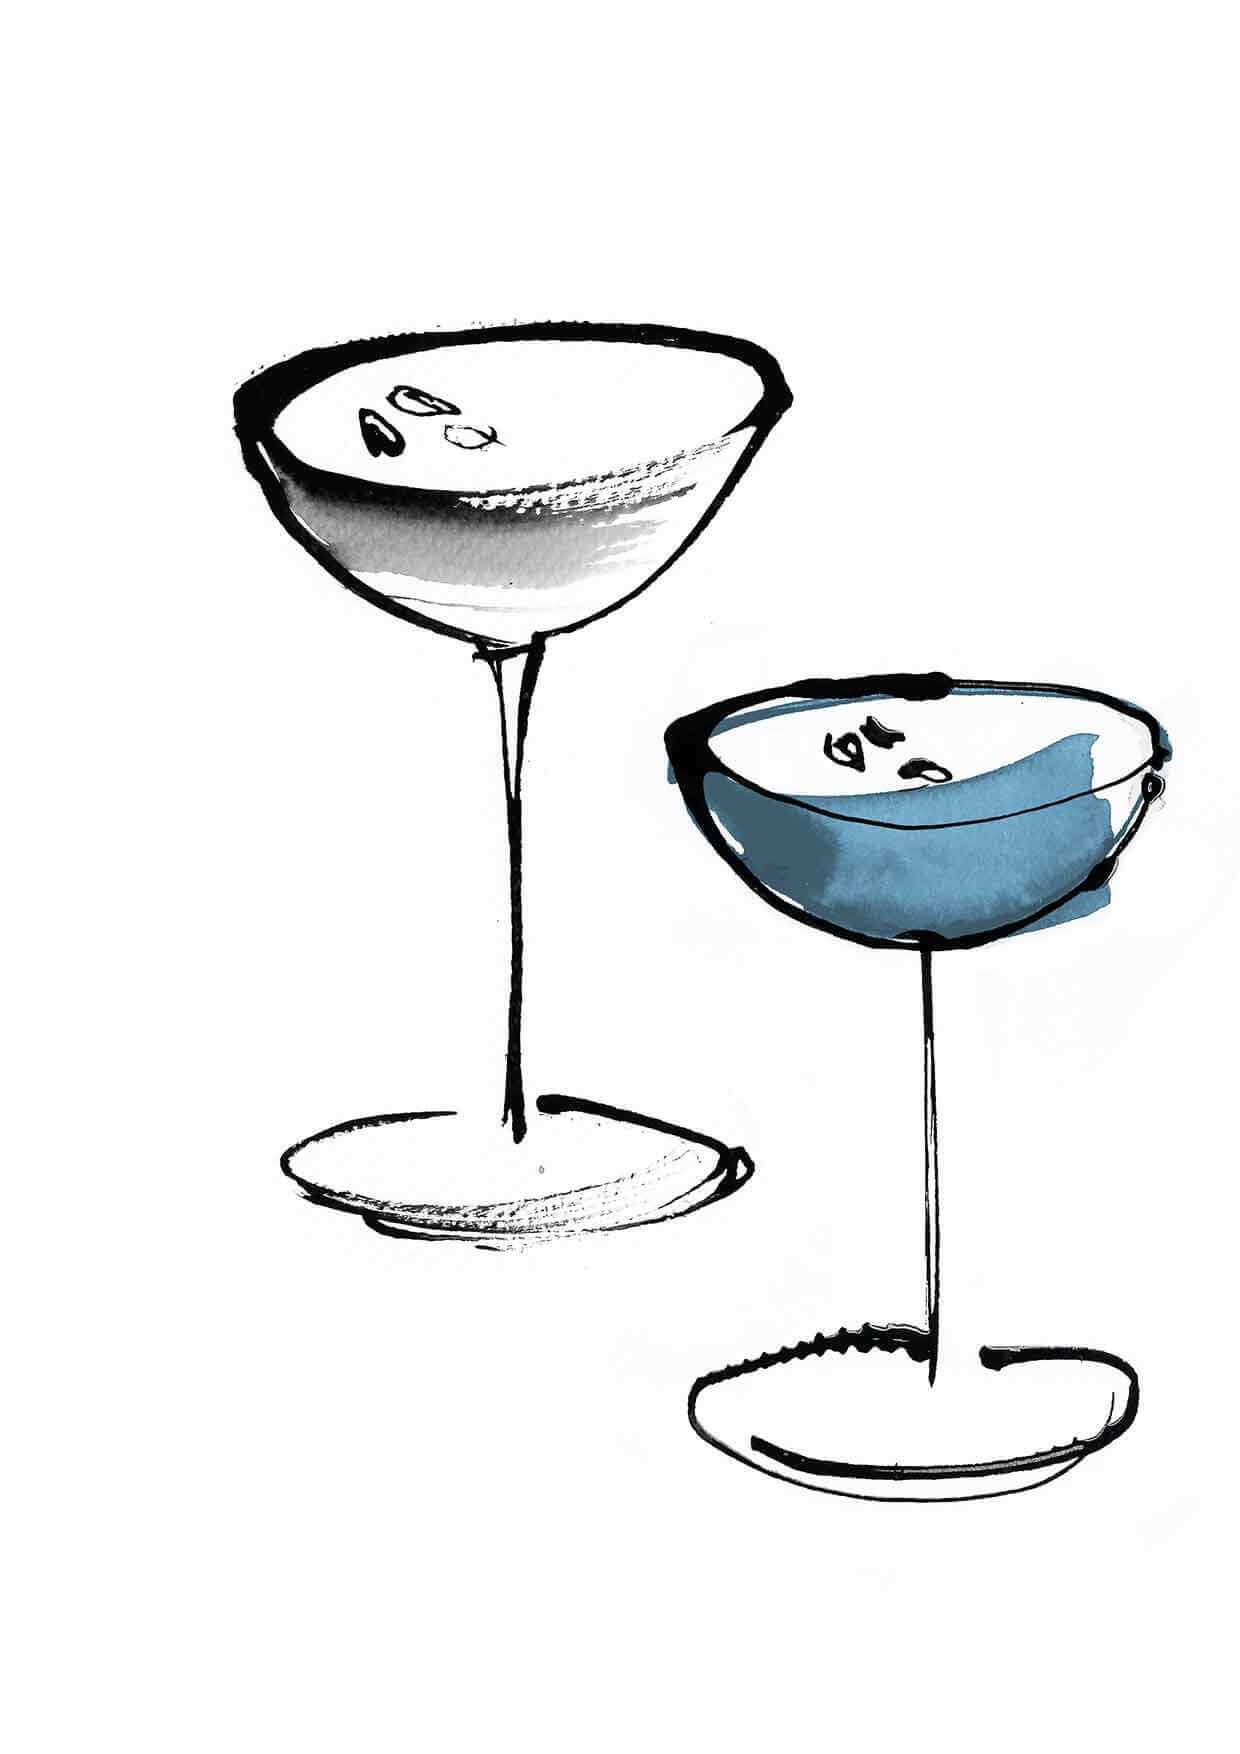 Illustration of a expresso martini cocktails.Food and drink illustration. Energetic line work, ink and watercolour.